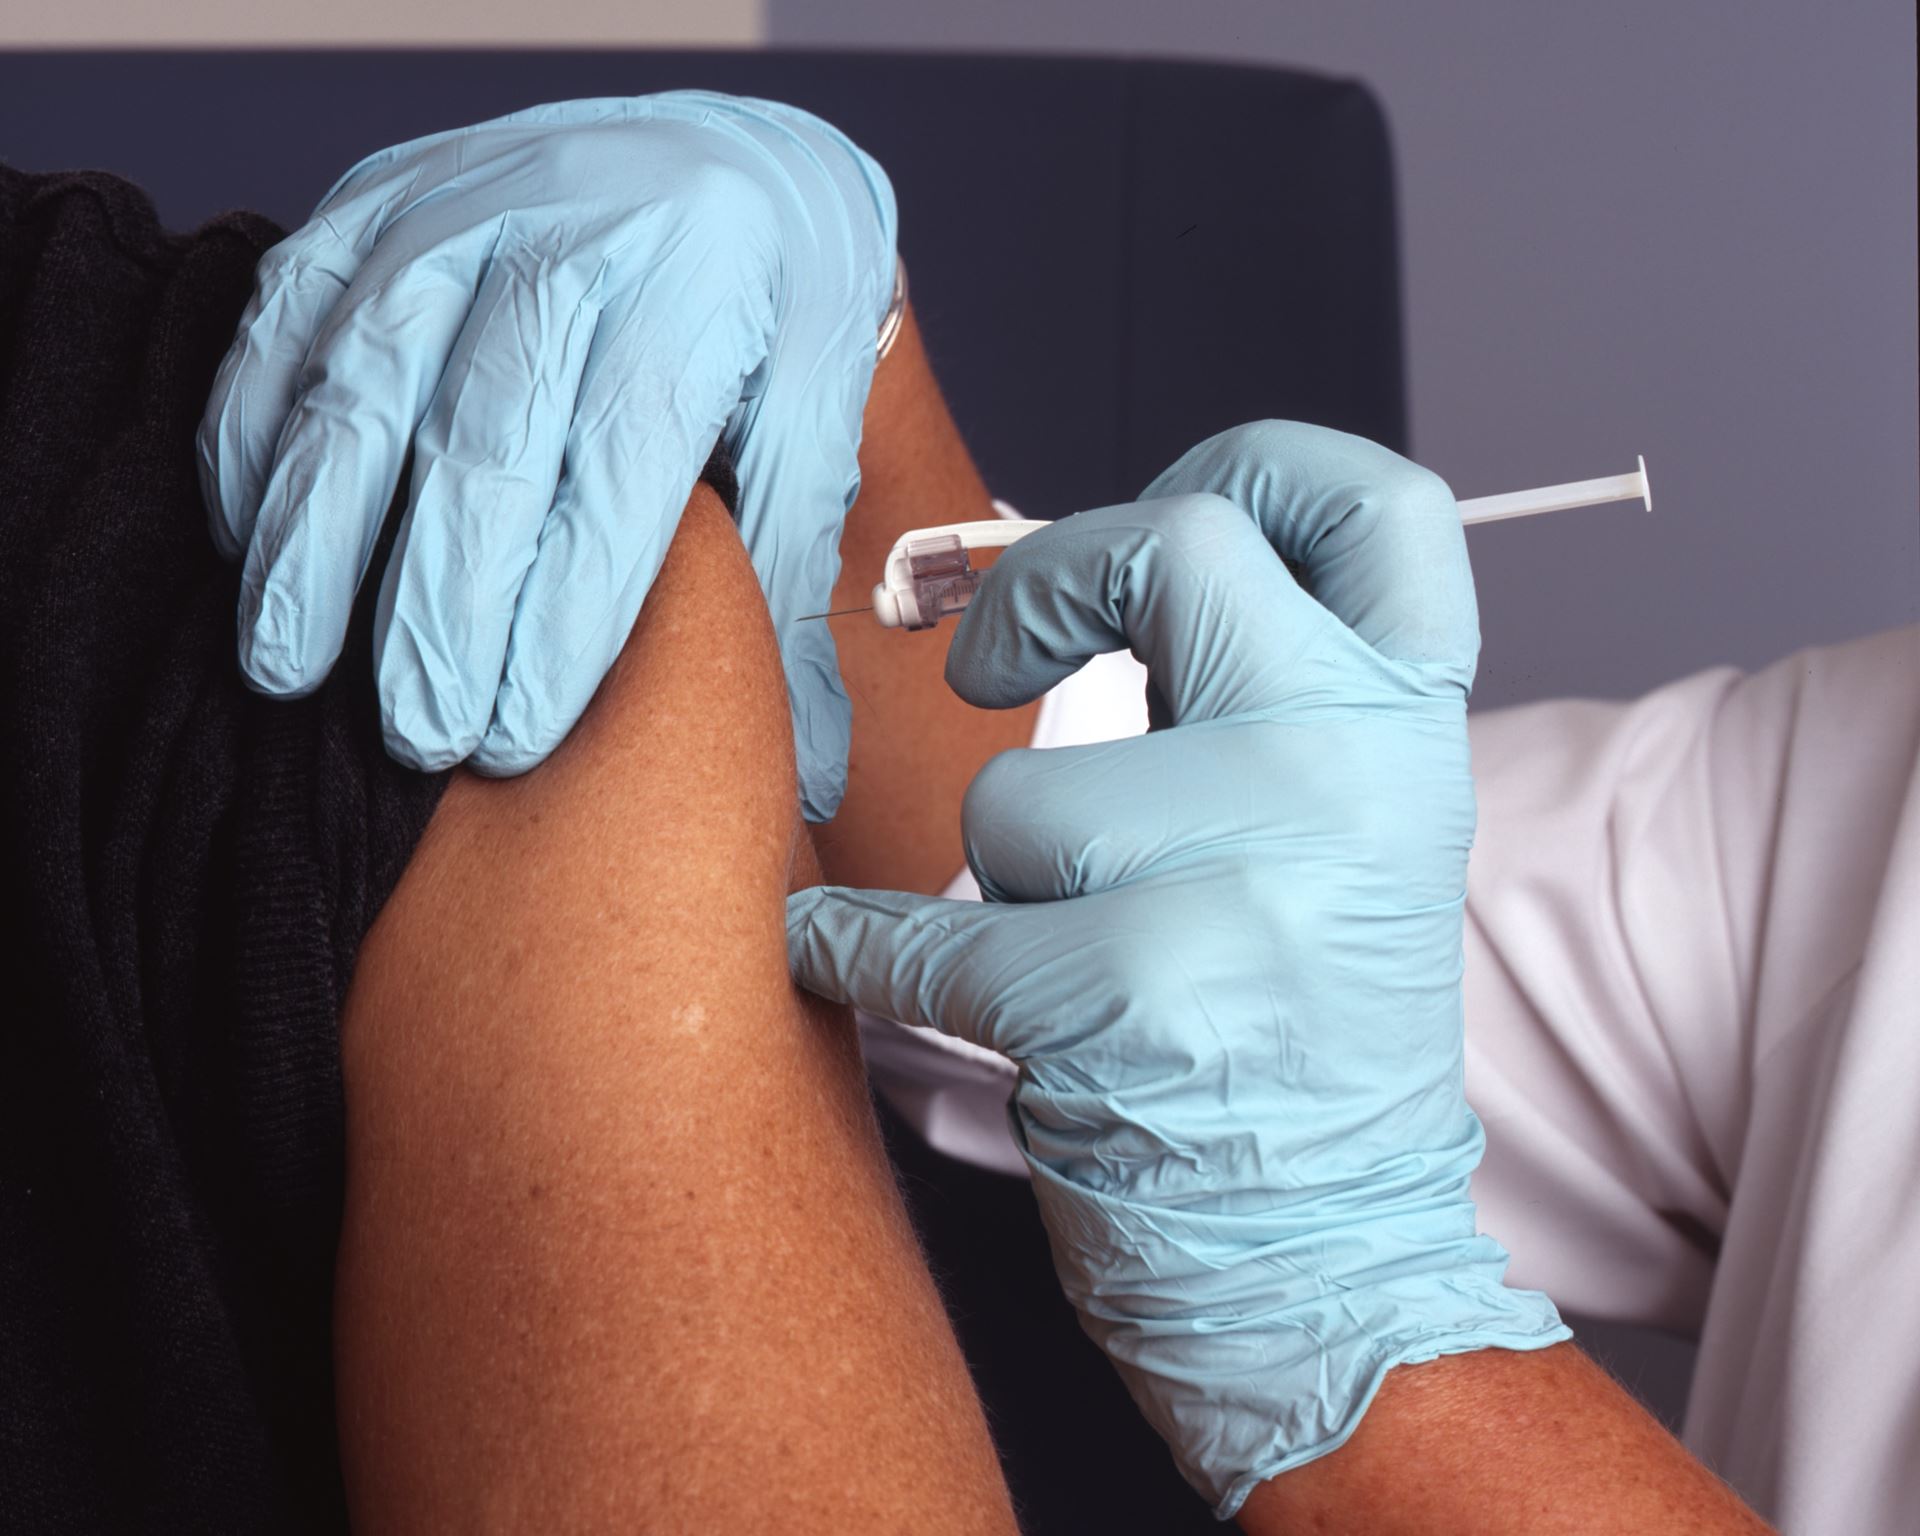 a person getting vaccinated